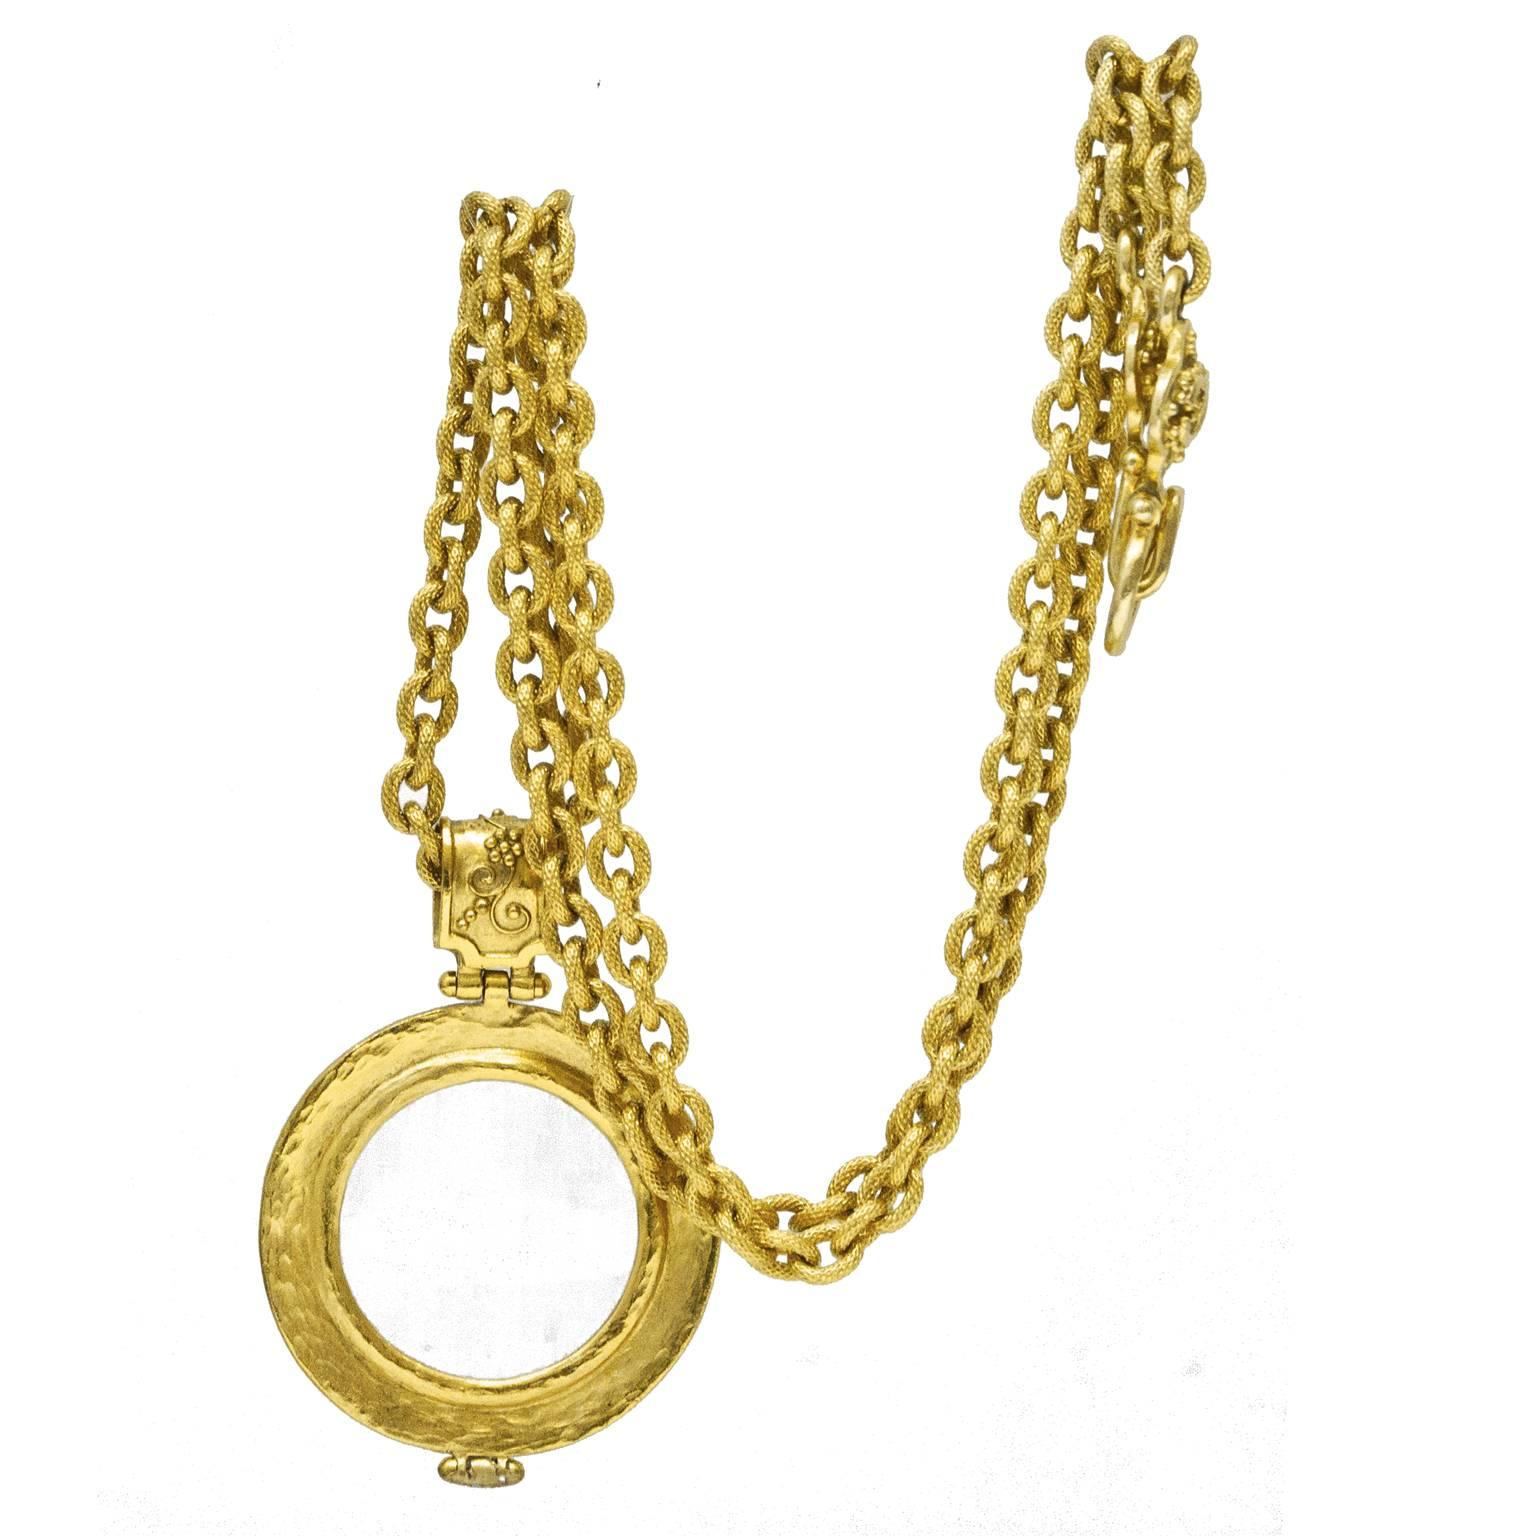 Chanel gold tone loupe from the autumn 1995 collection. The textured chain link necklace features a magnifying glass pendant decorated with grape and flower filigree around the edge. Double CC decorated hook clasp. Signed on the clasp. In excellent